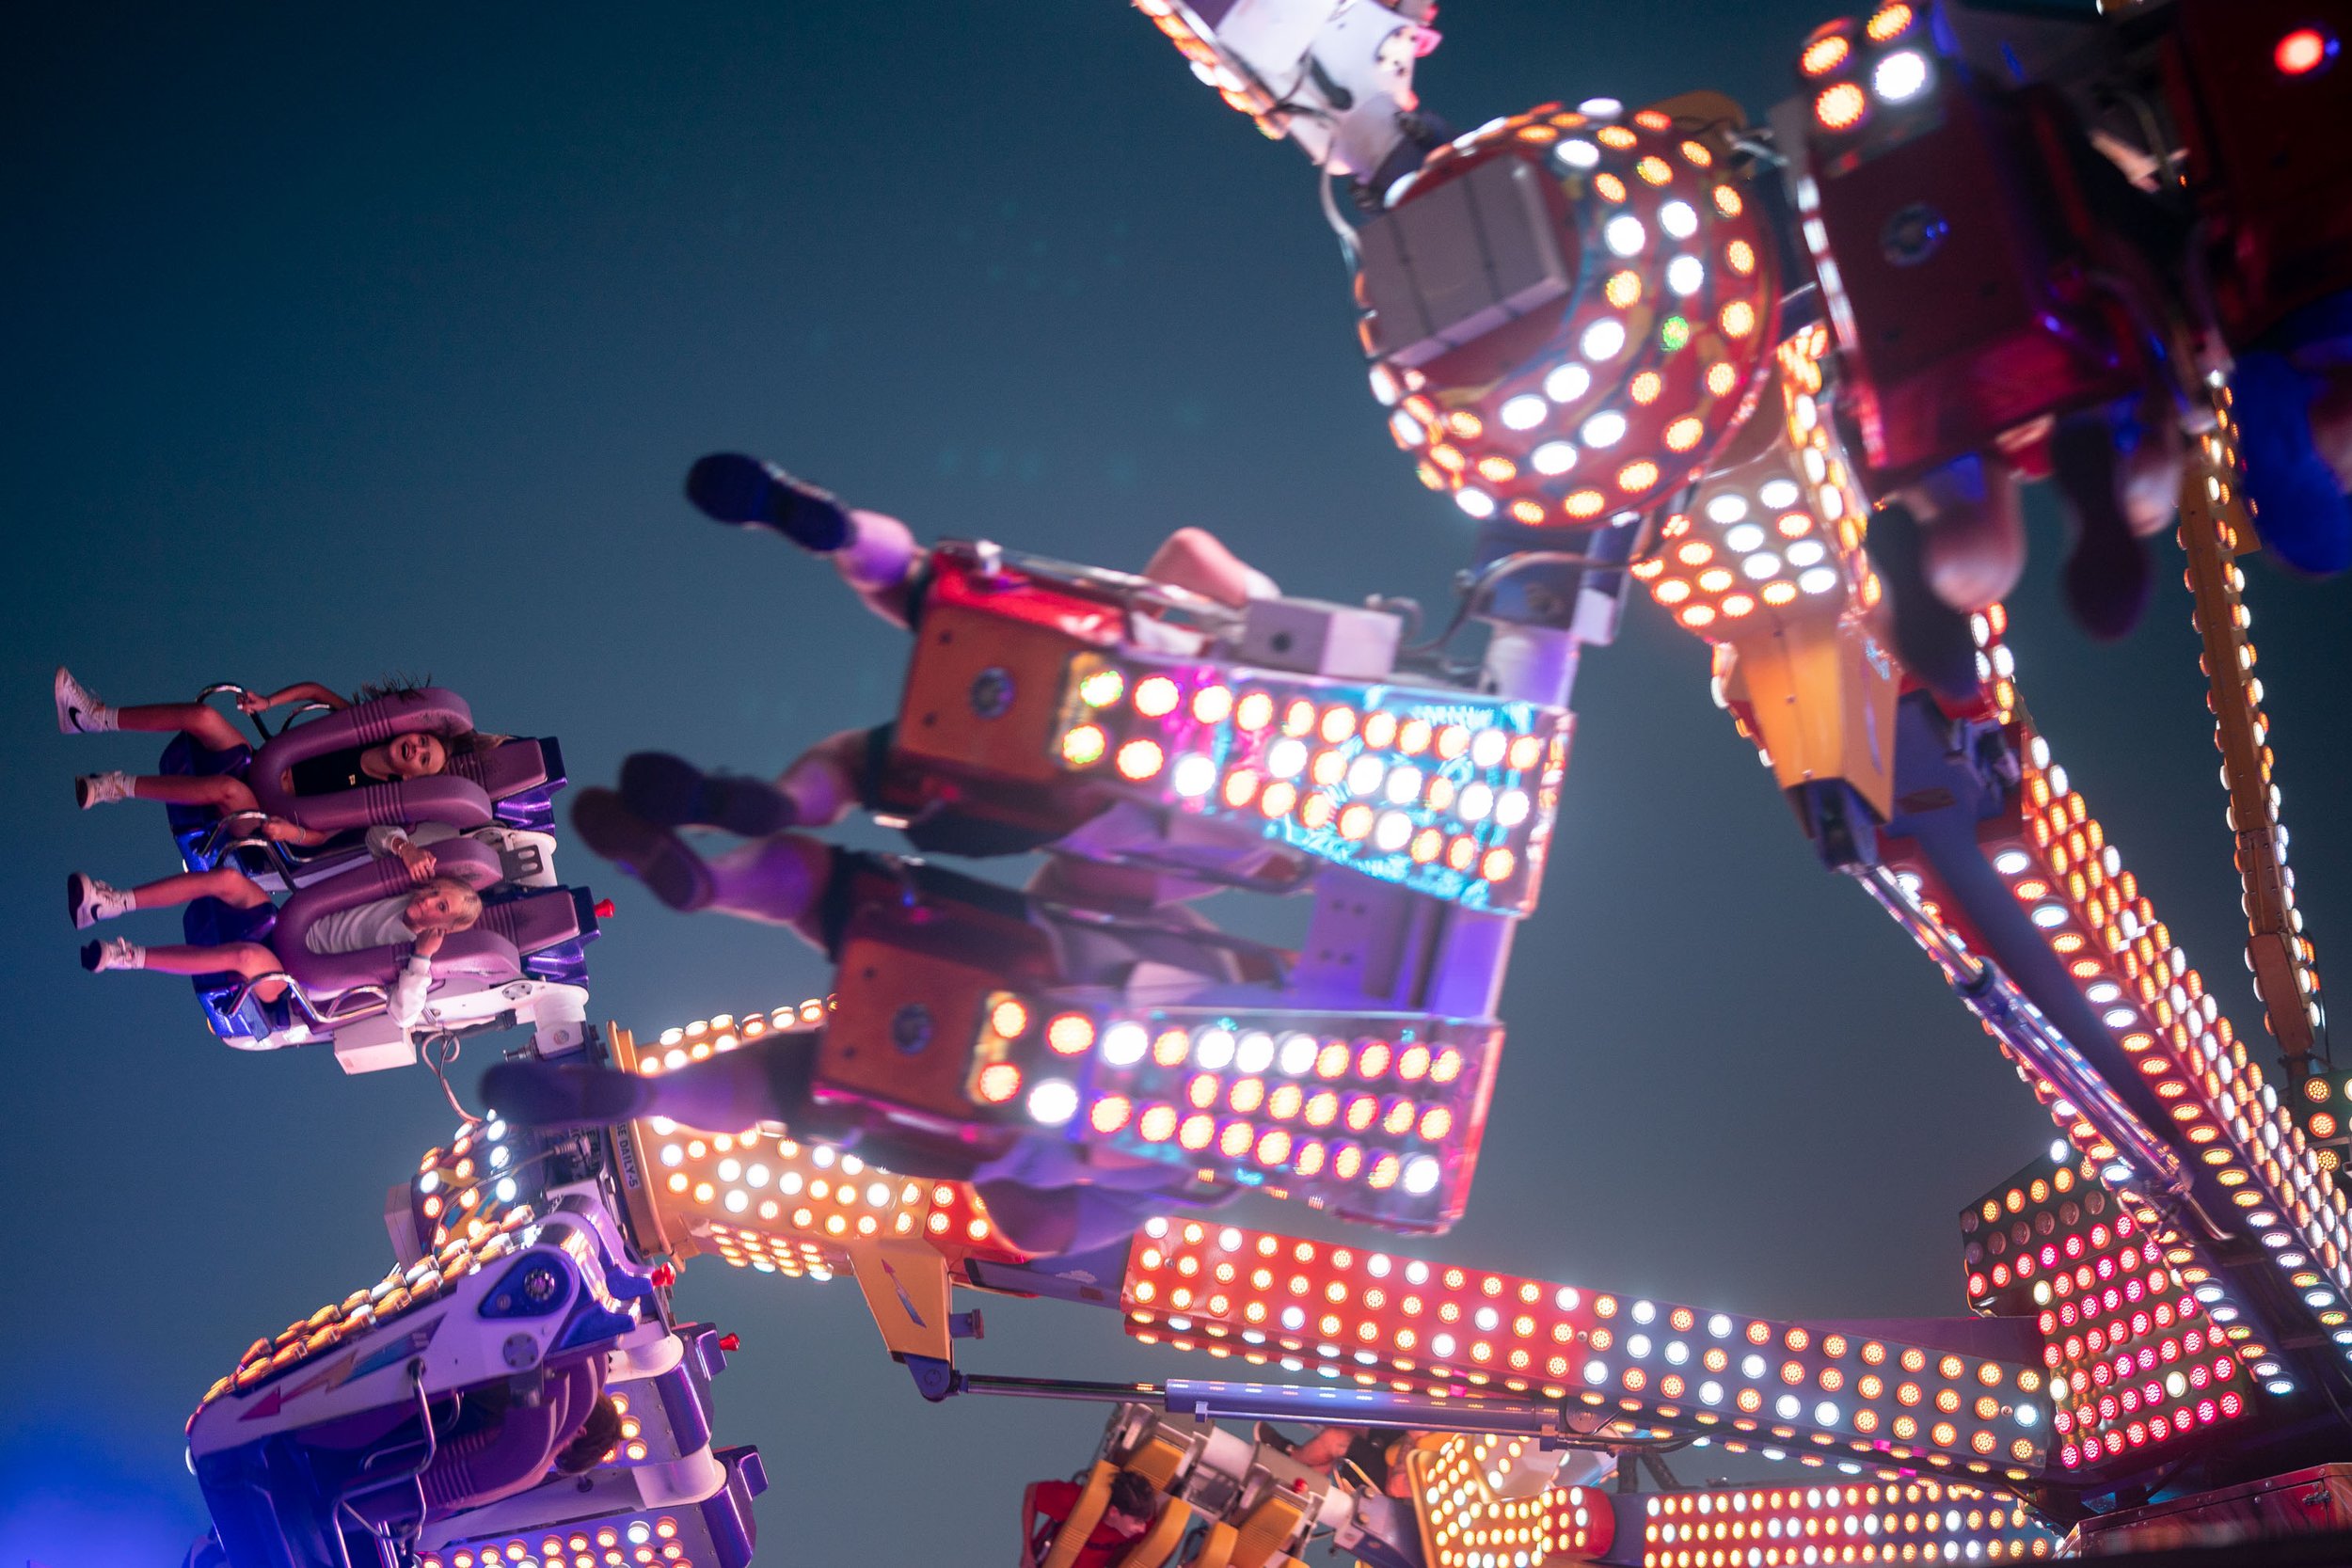  Teens enjoy a ride at the Minnesota State Fair Aug. 25, 2022 in St. Paul, Minn. Many youth head to the fair before the school year begins for this end-of-summer tradition. The Minnesota State Fair is the largest state fair in the United States by av